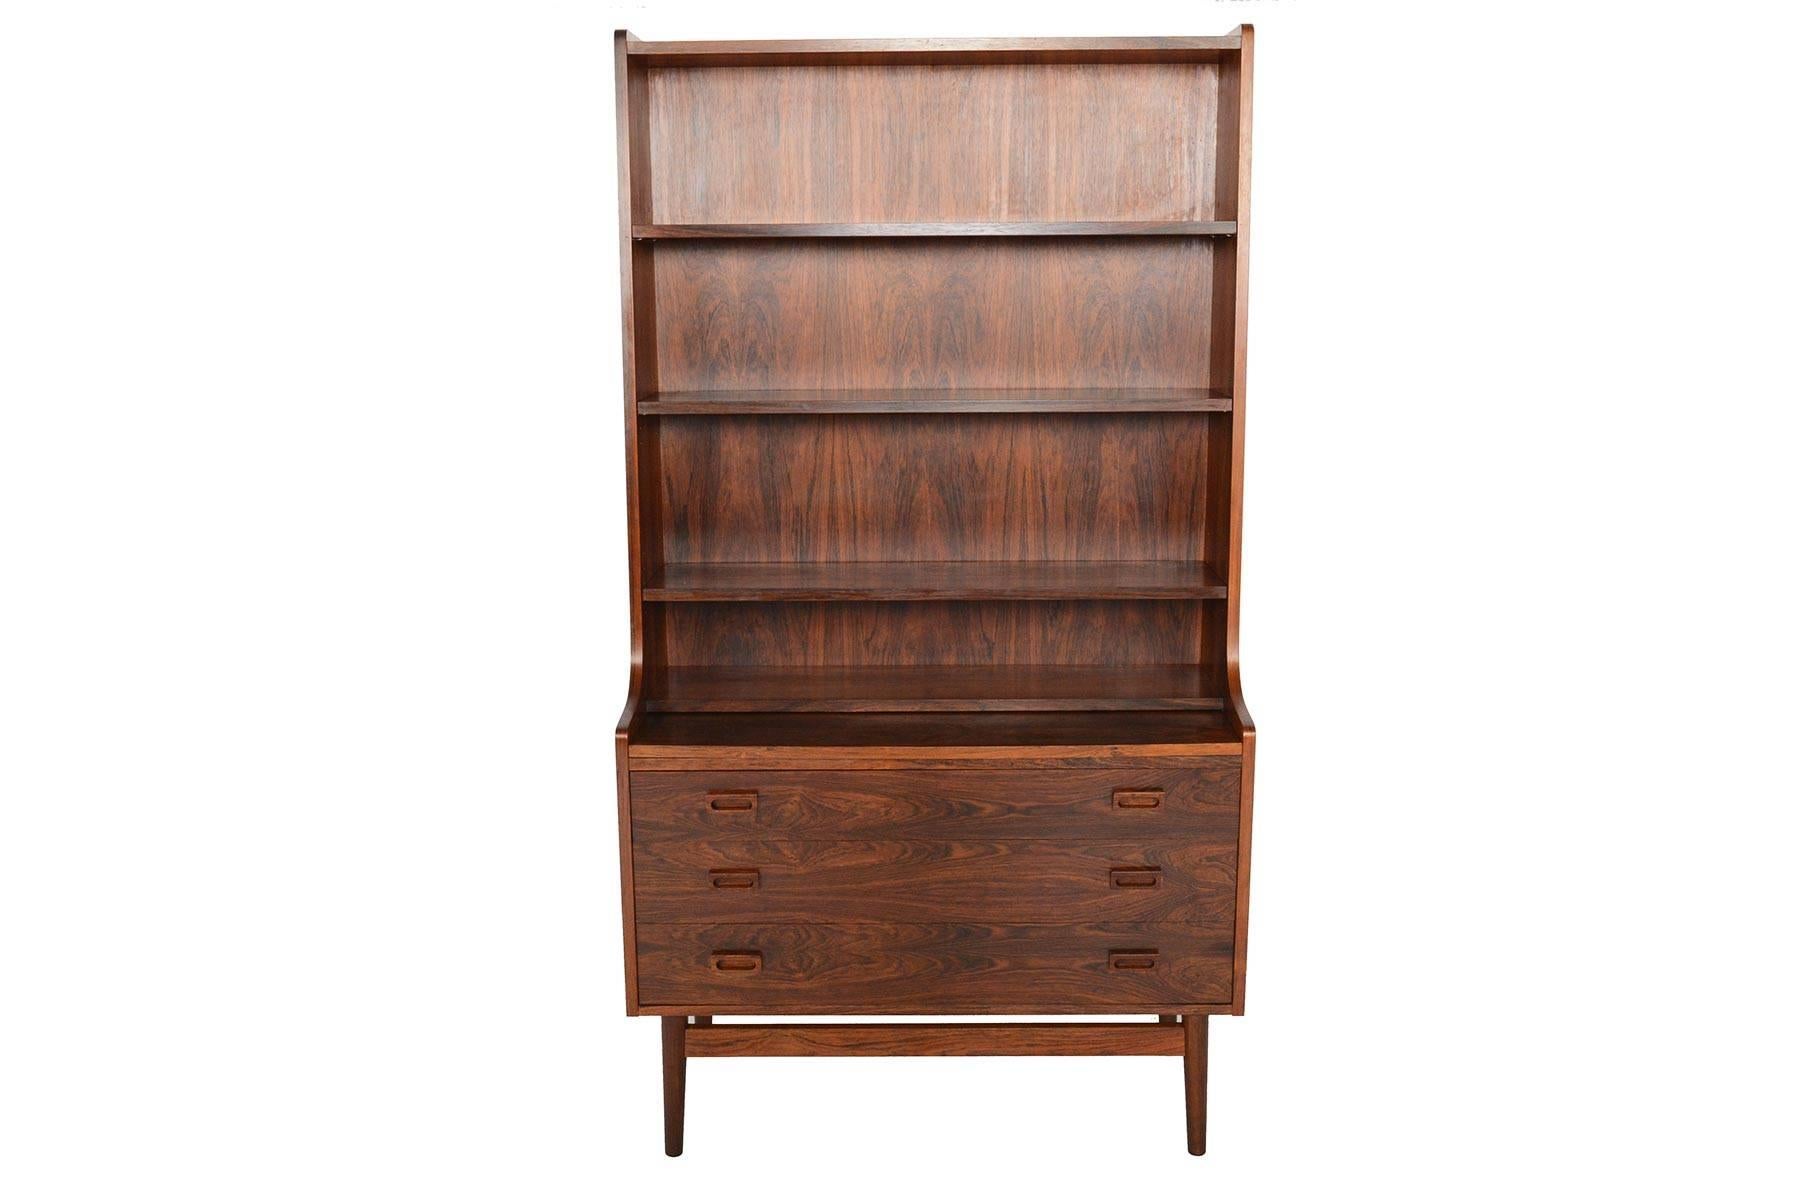 This beautiful Danish modern midcentury bookcase in Brazilian rosewood was designed by Johannes Sorth for Bornholm Møbelfabrik, Nexø in the mid 1960s. The tall, upper hutch features three adjustable shelves. The lower cabinet features three large